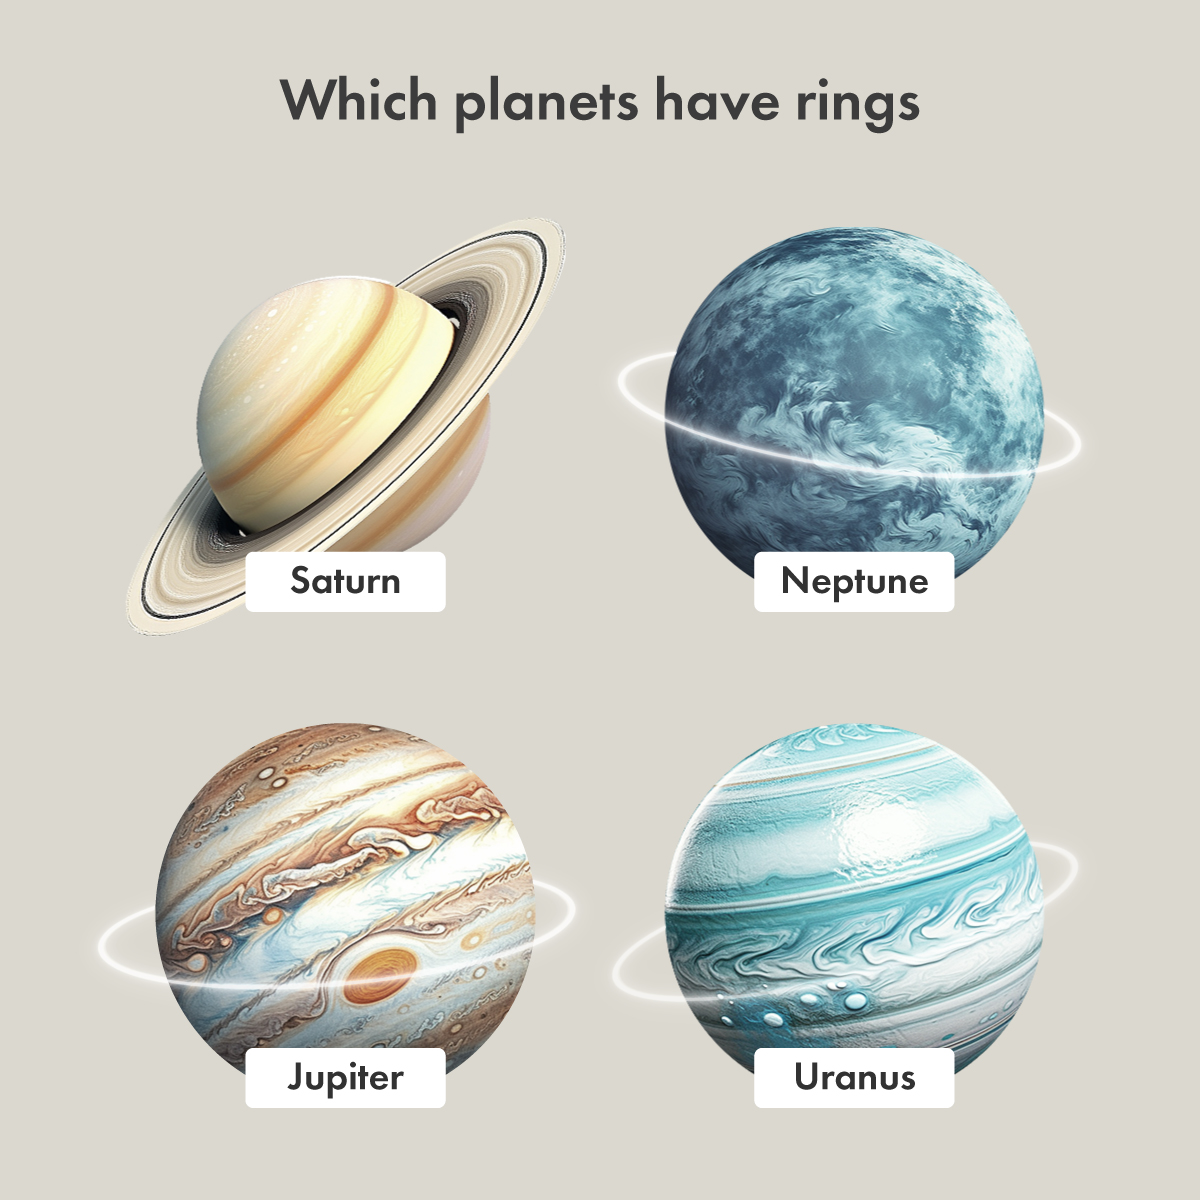 Planets with rings: which planets have rings and why